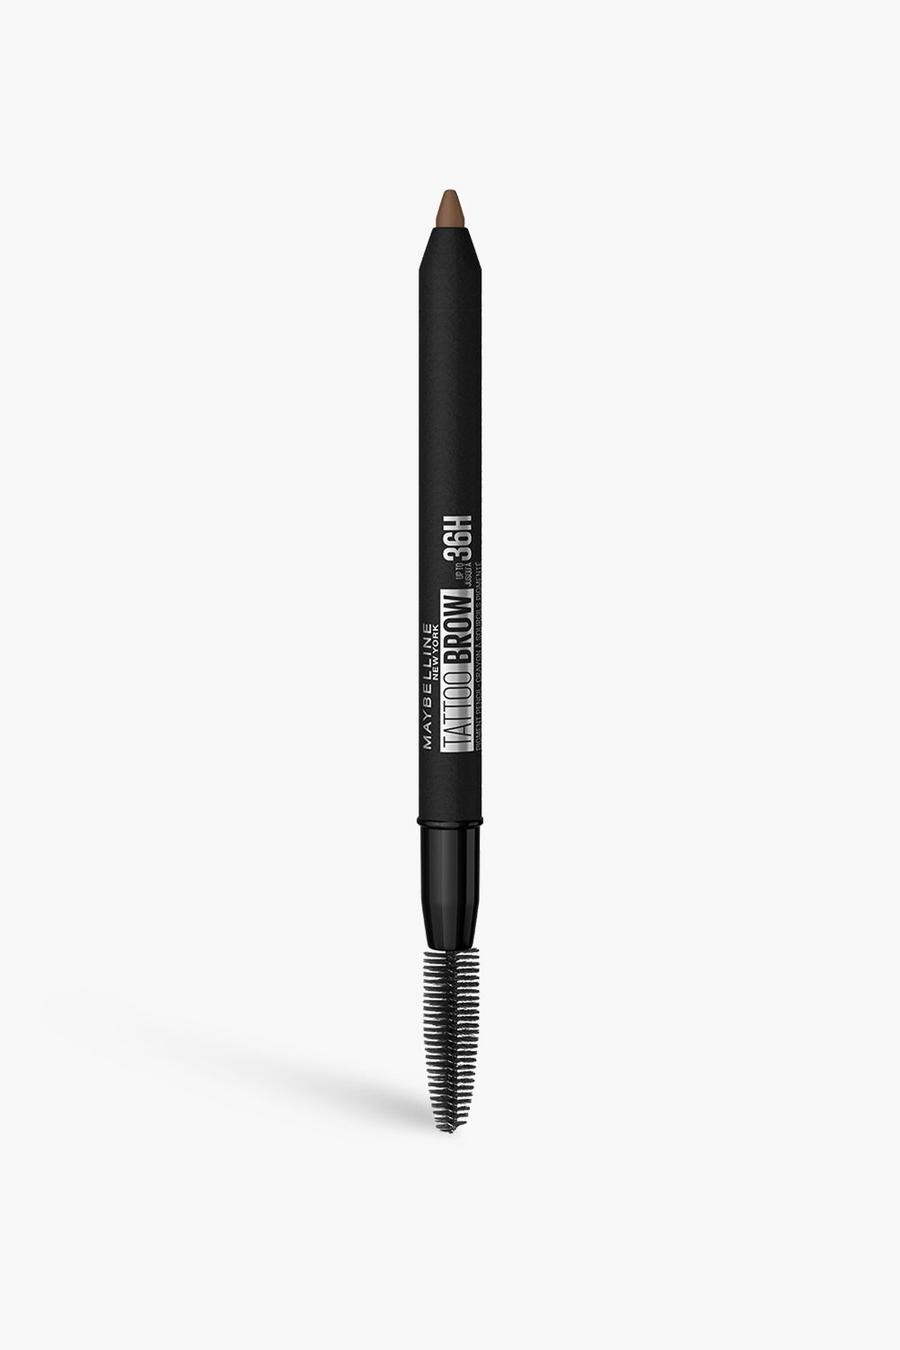 Maybelline Tattoo Brow Semi Permanent 36HR Eyebrow Pencil - Soft Brown 03 image number 1